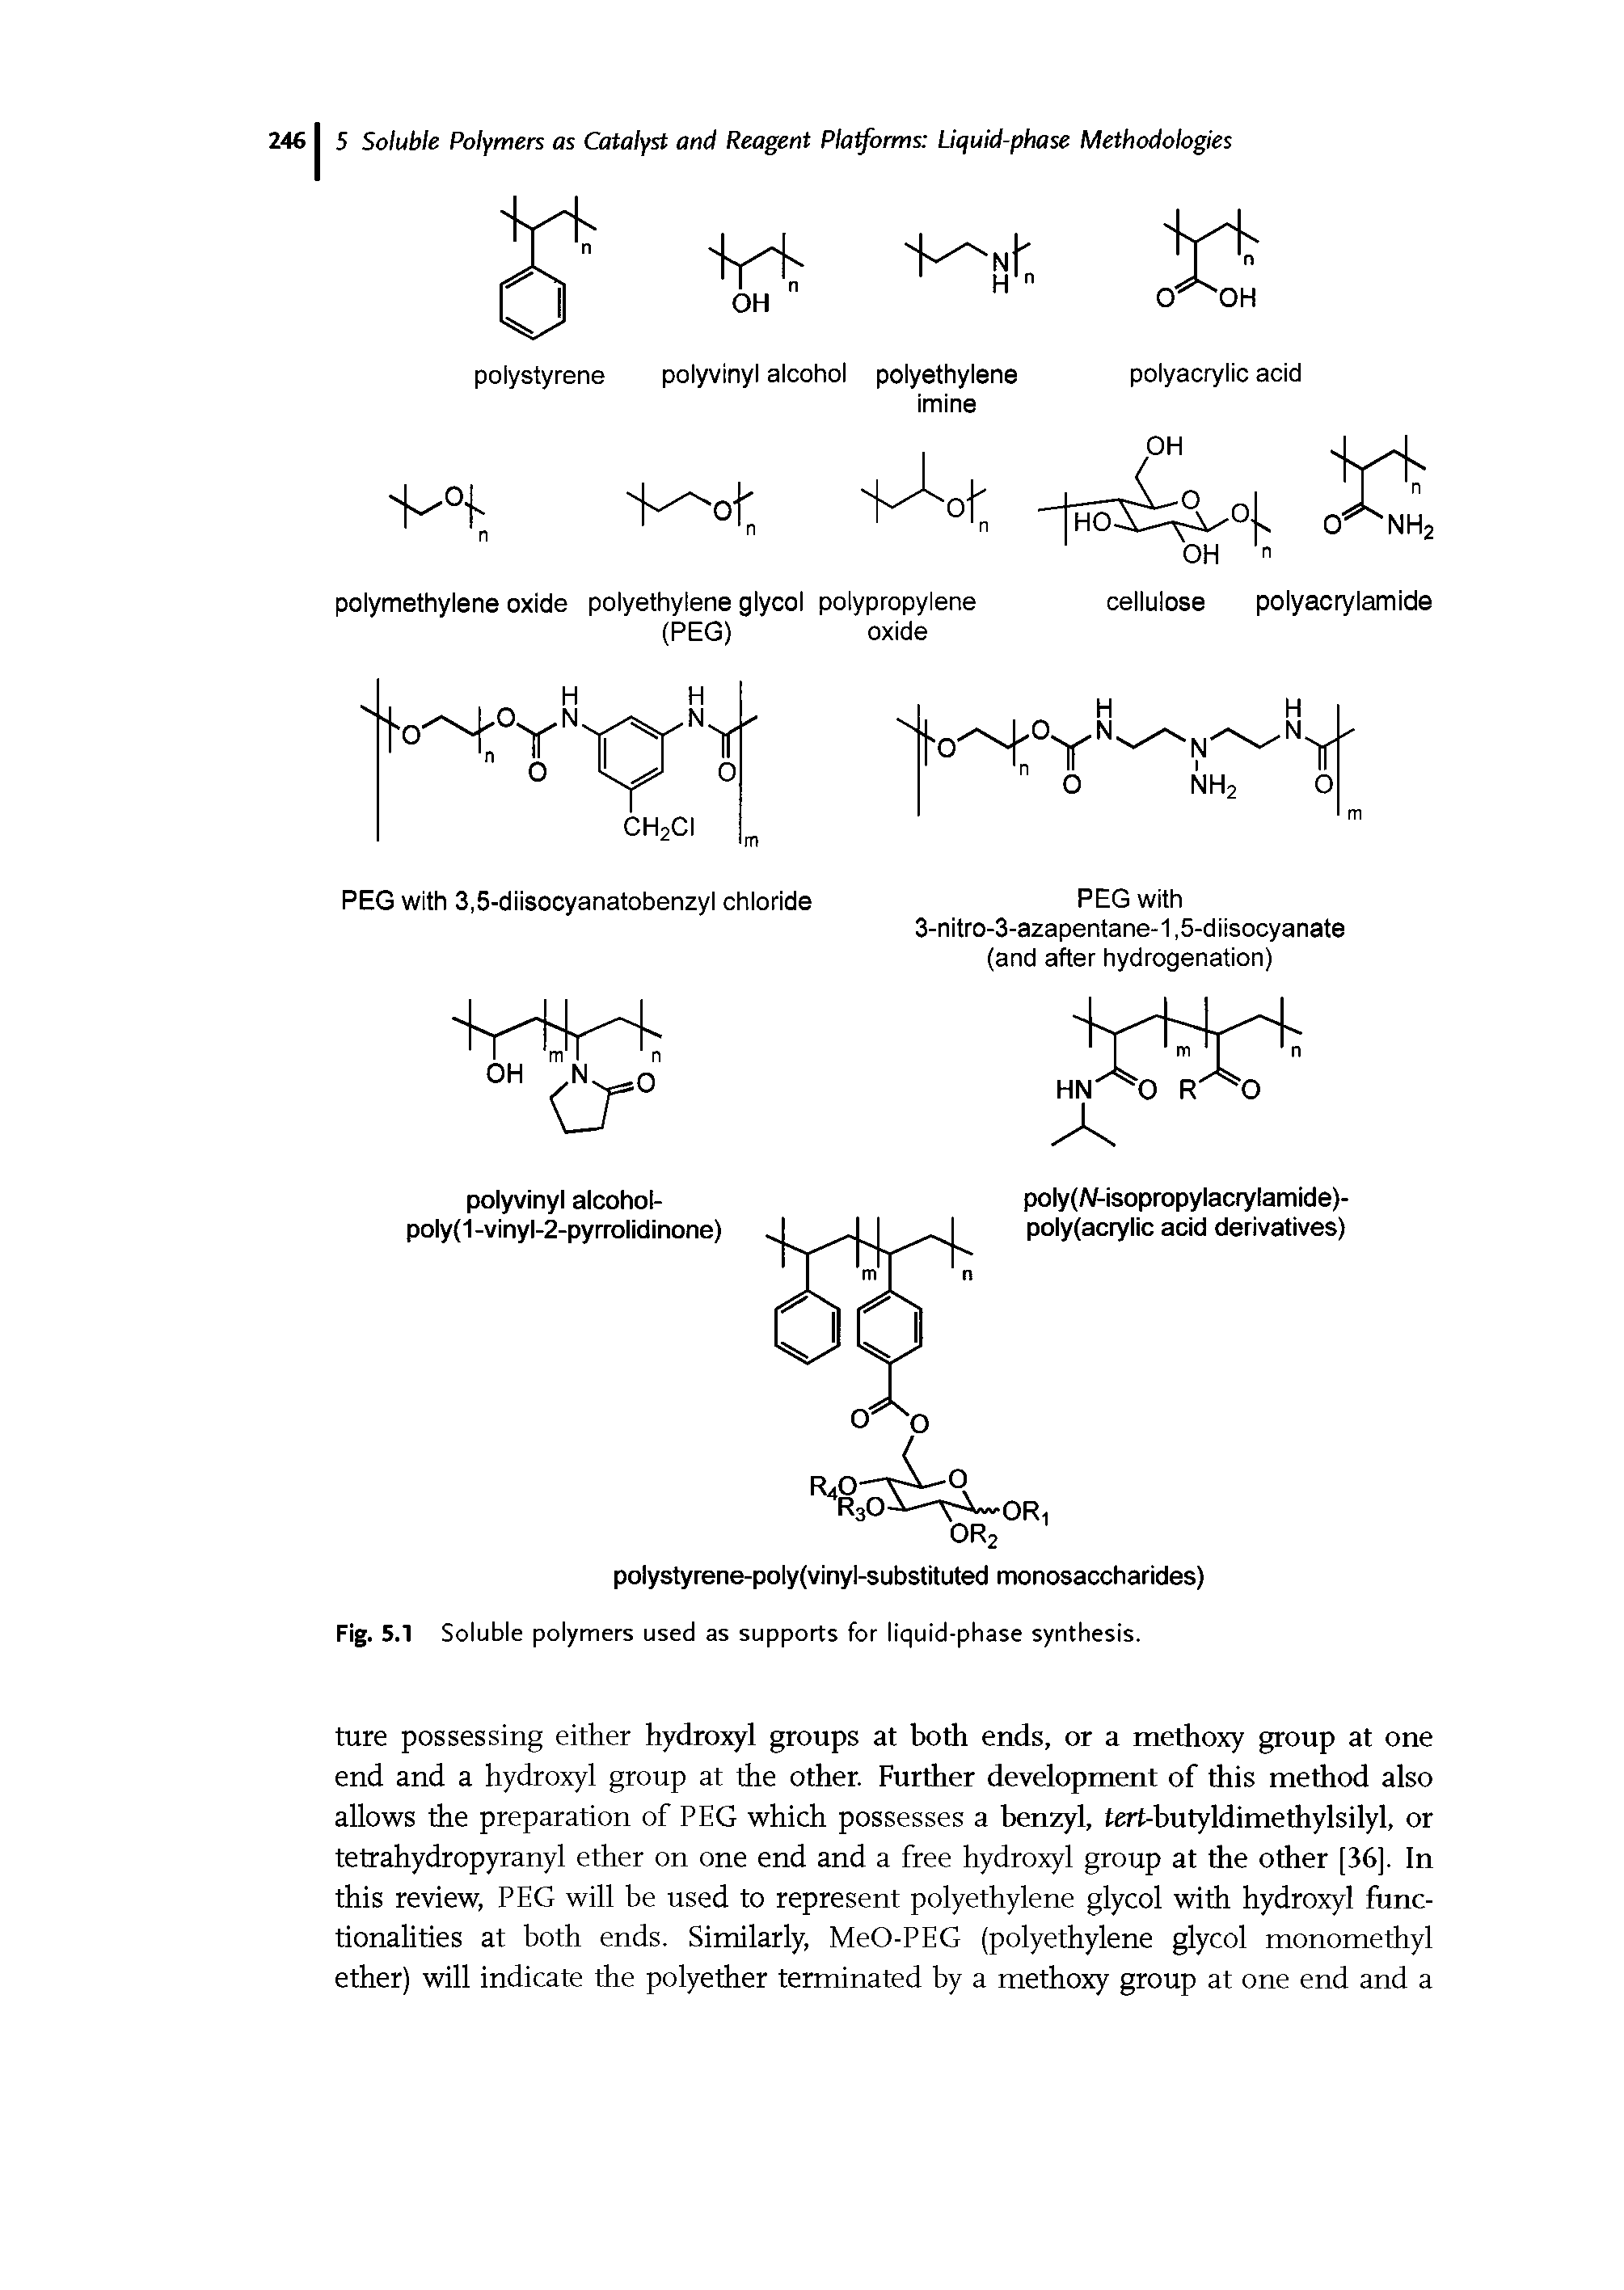 Fig. 5.1 Soluble polymers used as supports for liquid-phase synthesis.